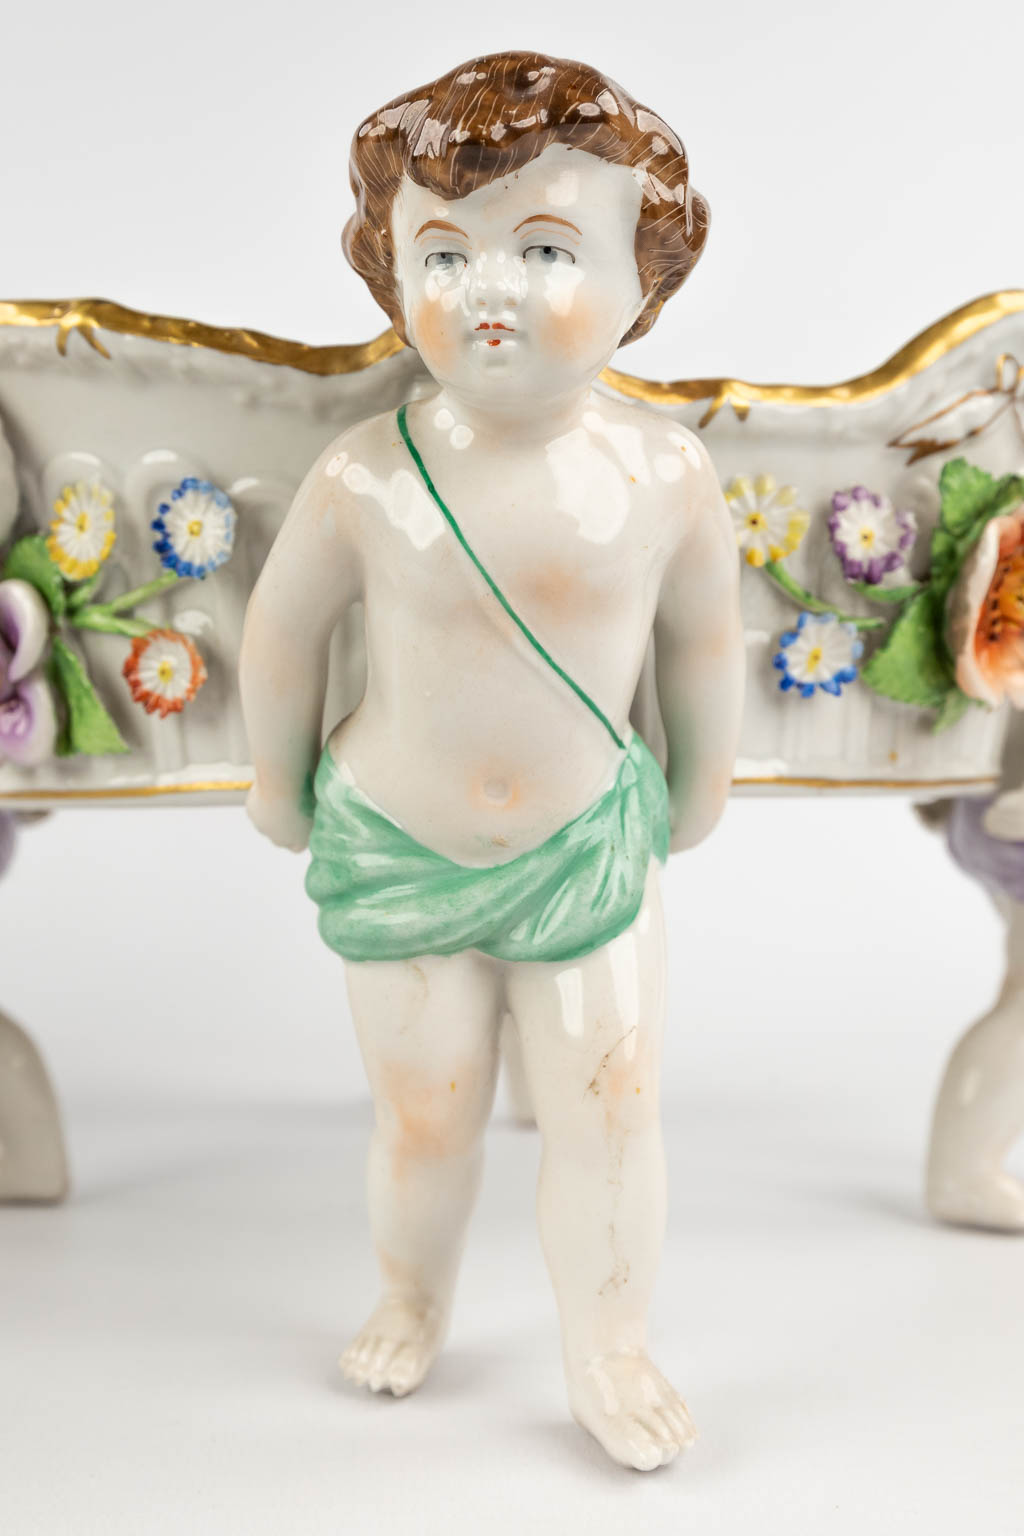 Two baskets, carried by putti. Polychrome German porcelain, 20th C. (H:17 x D:33 cm)